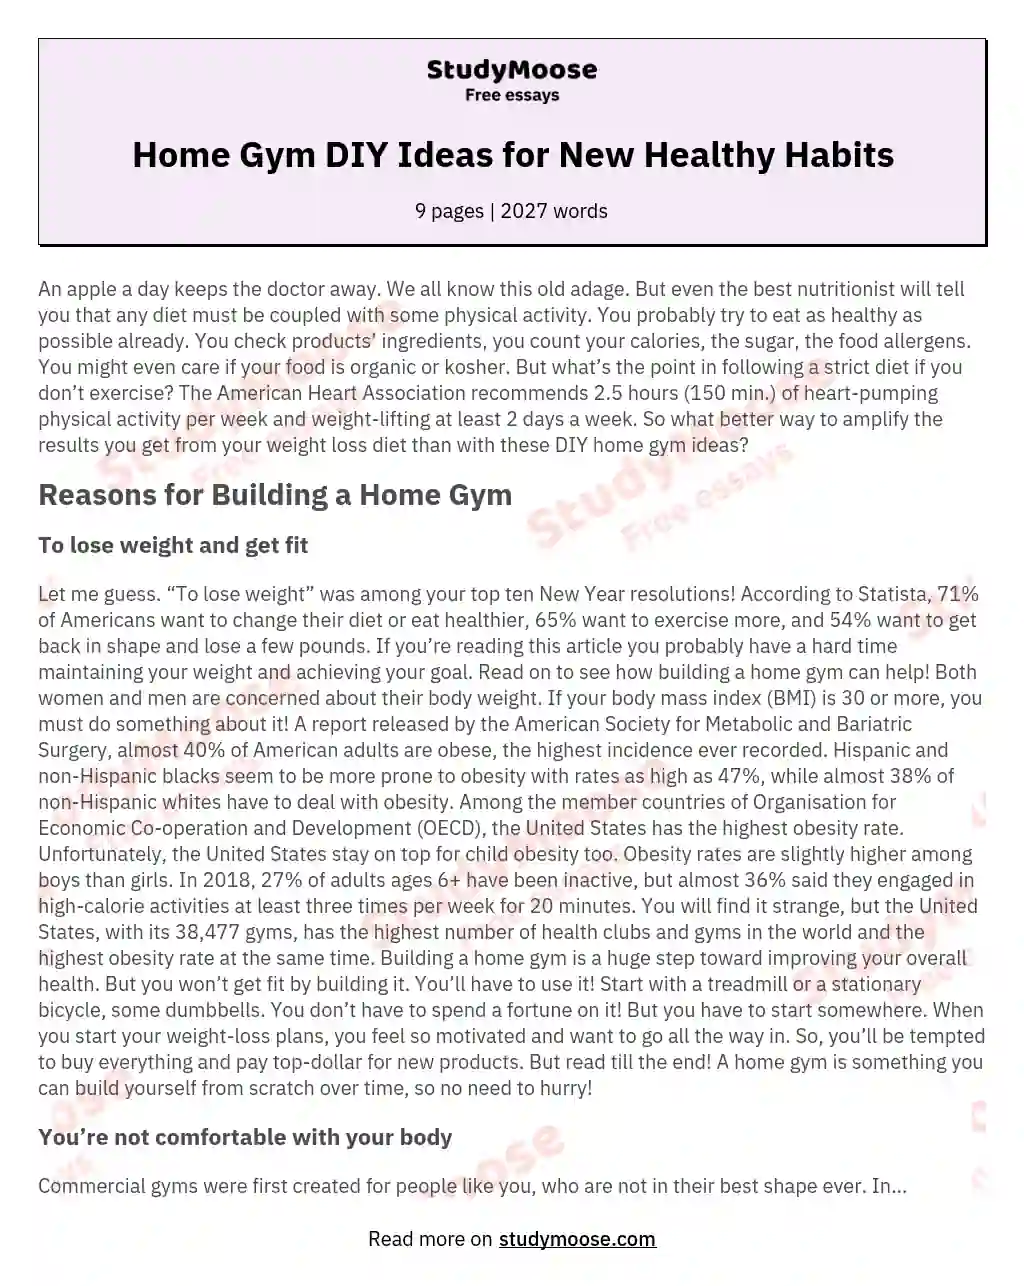 Home Gym DIY Ideas for New Healthy Habits